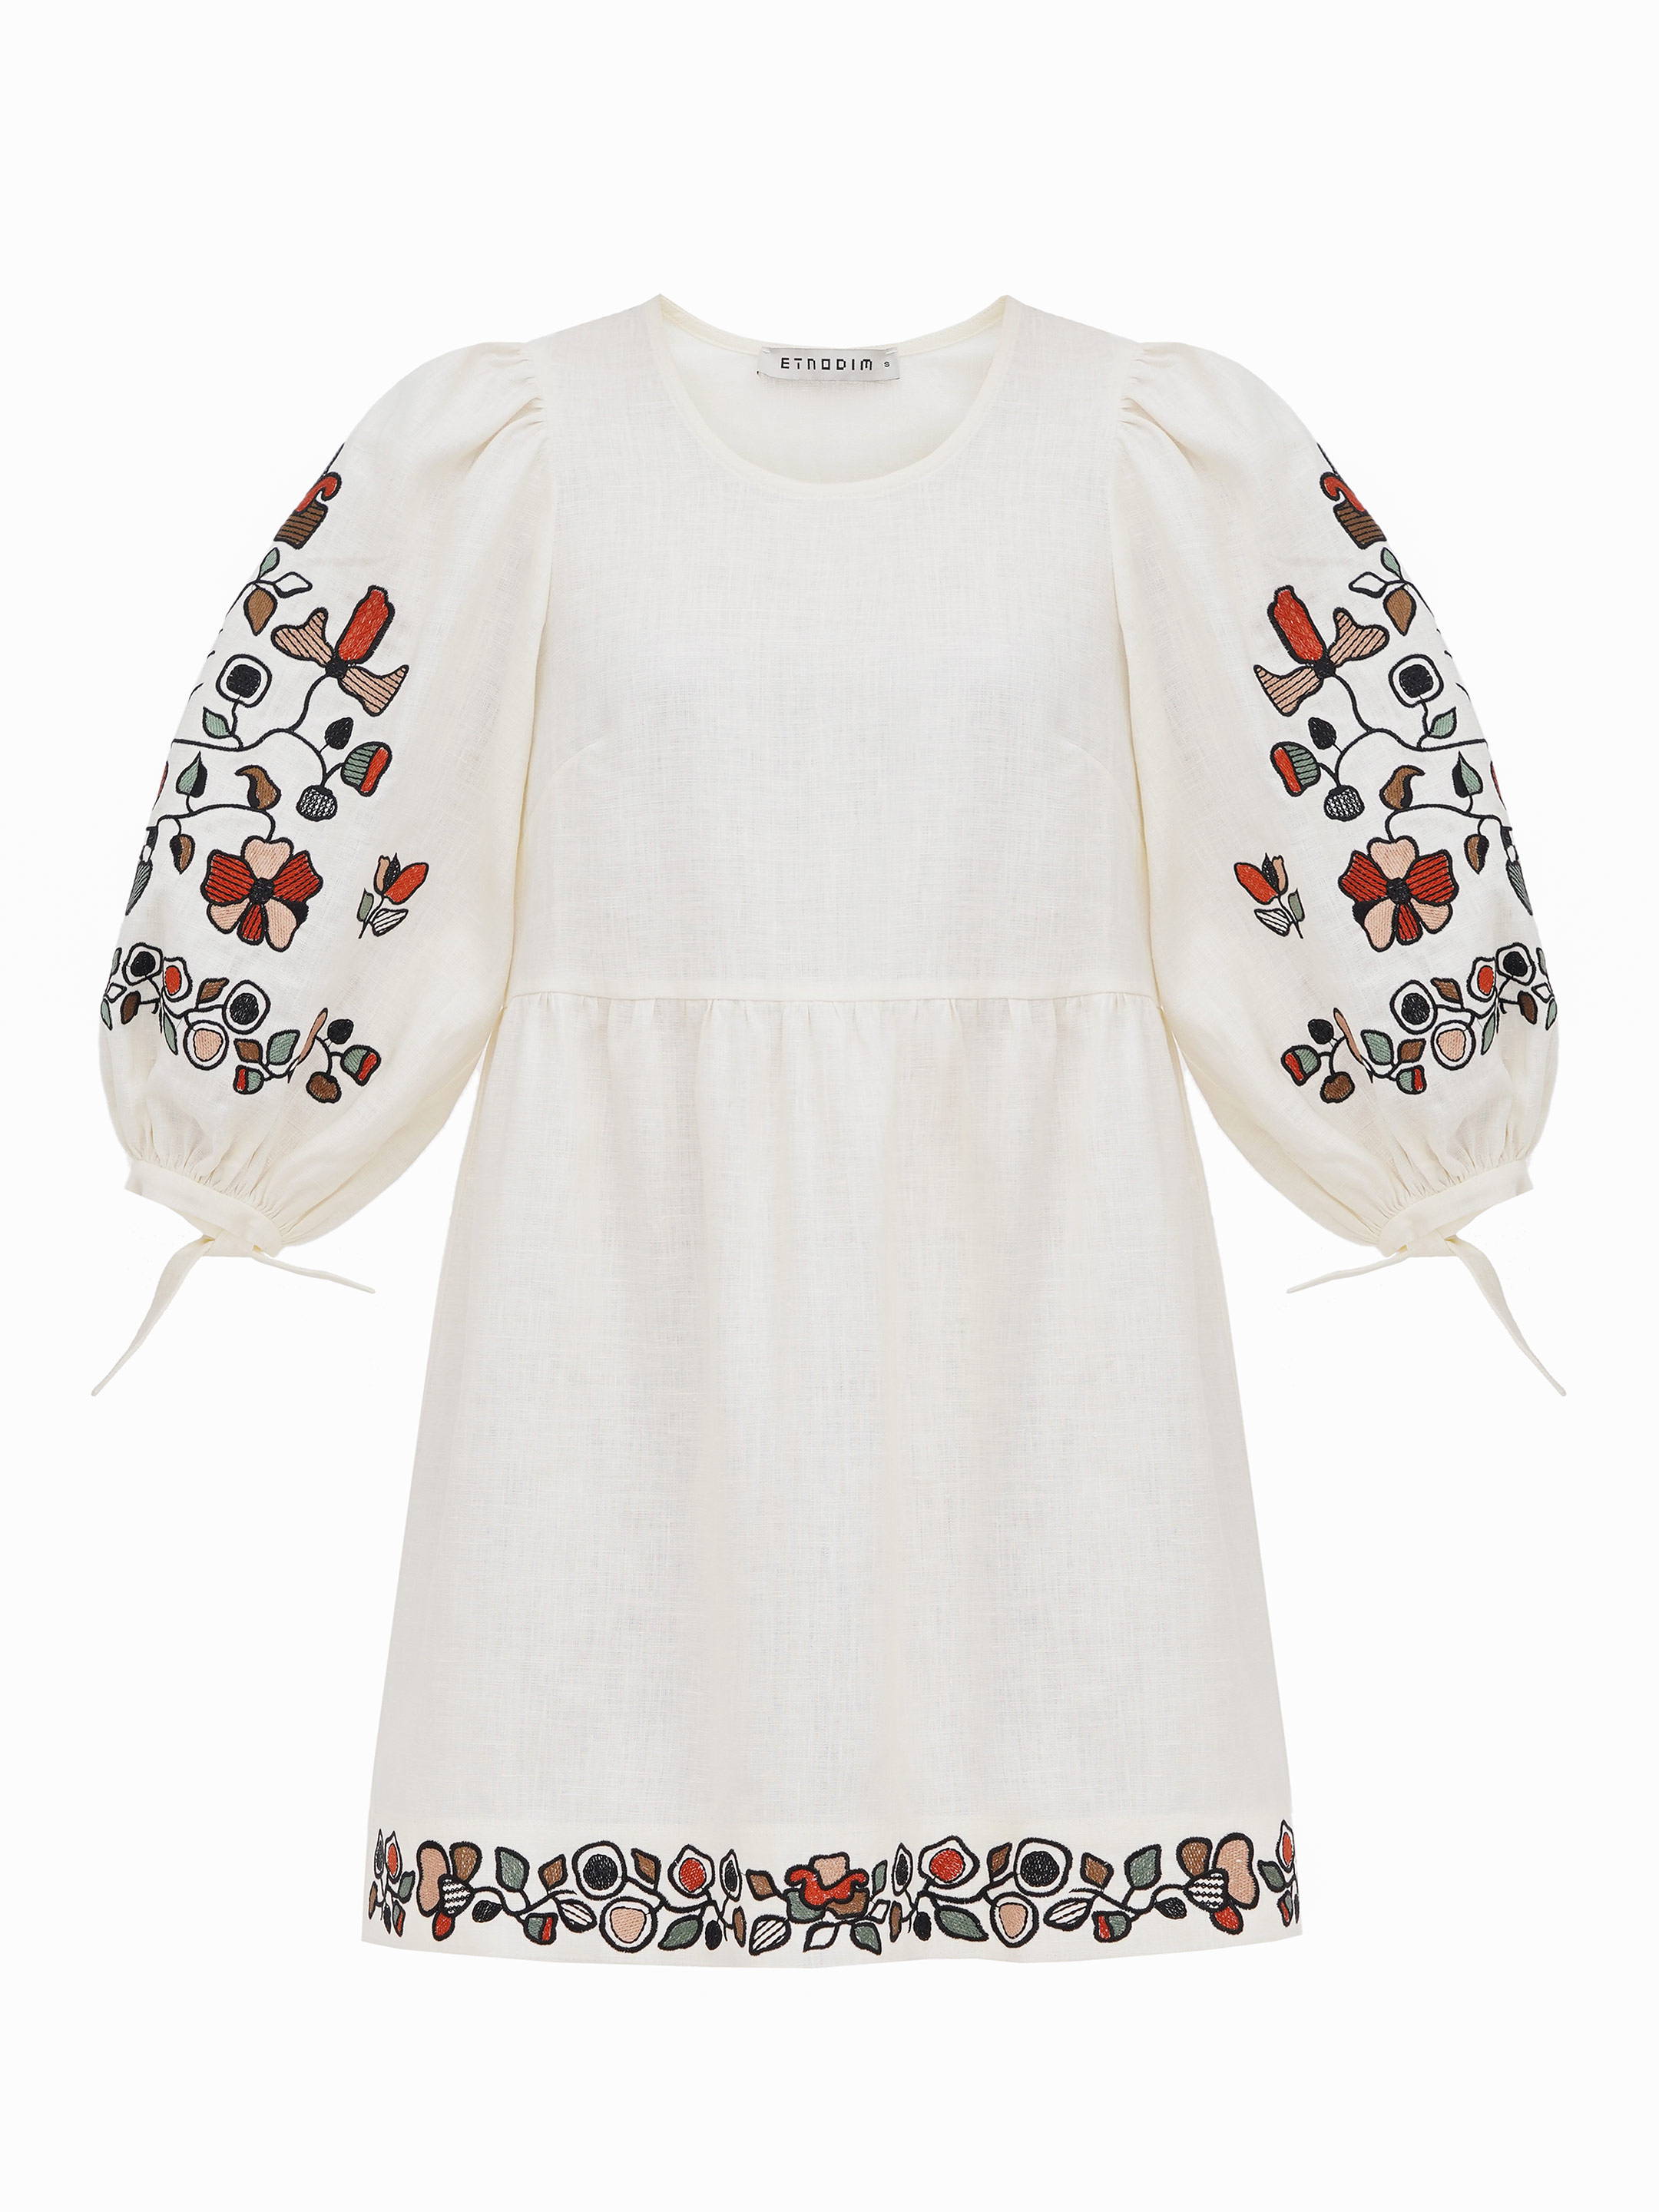 Women's embroidered dresses  Buy Women's embroidered dresses in Kyiv —  Etnodim